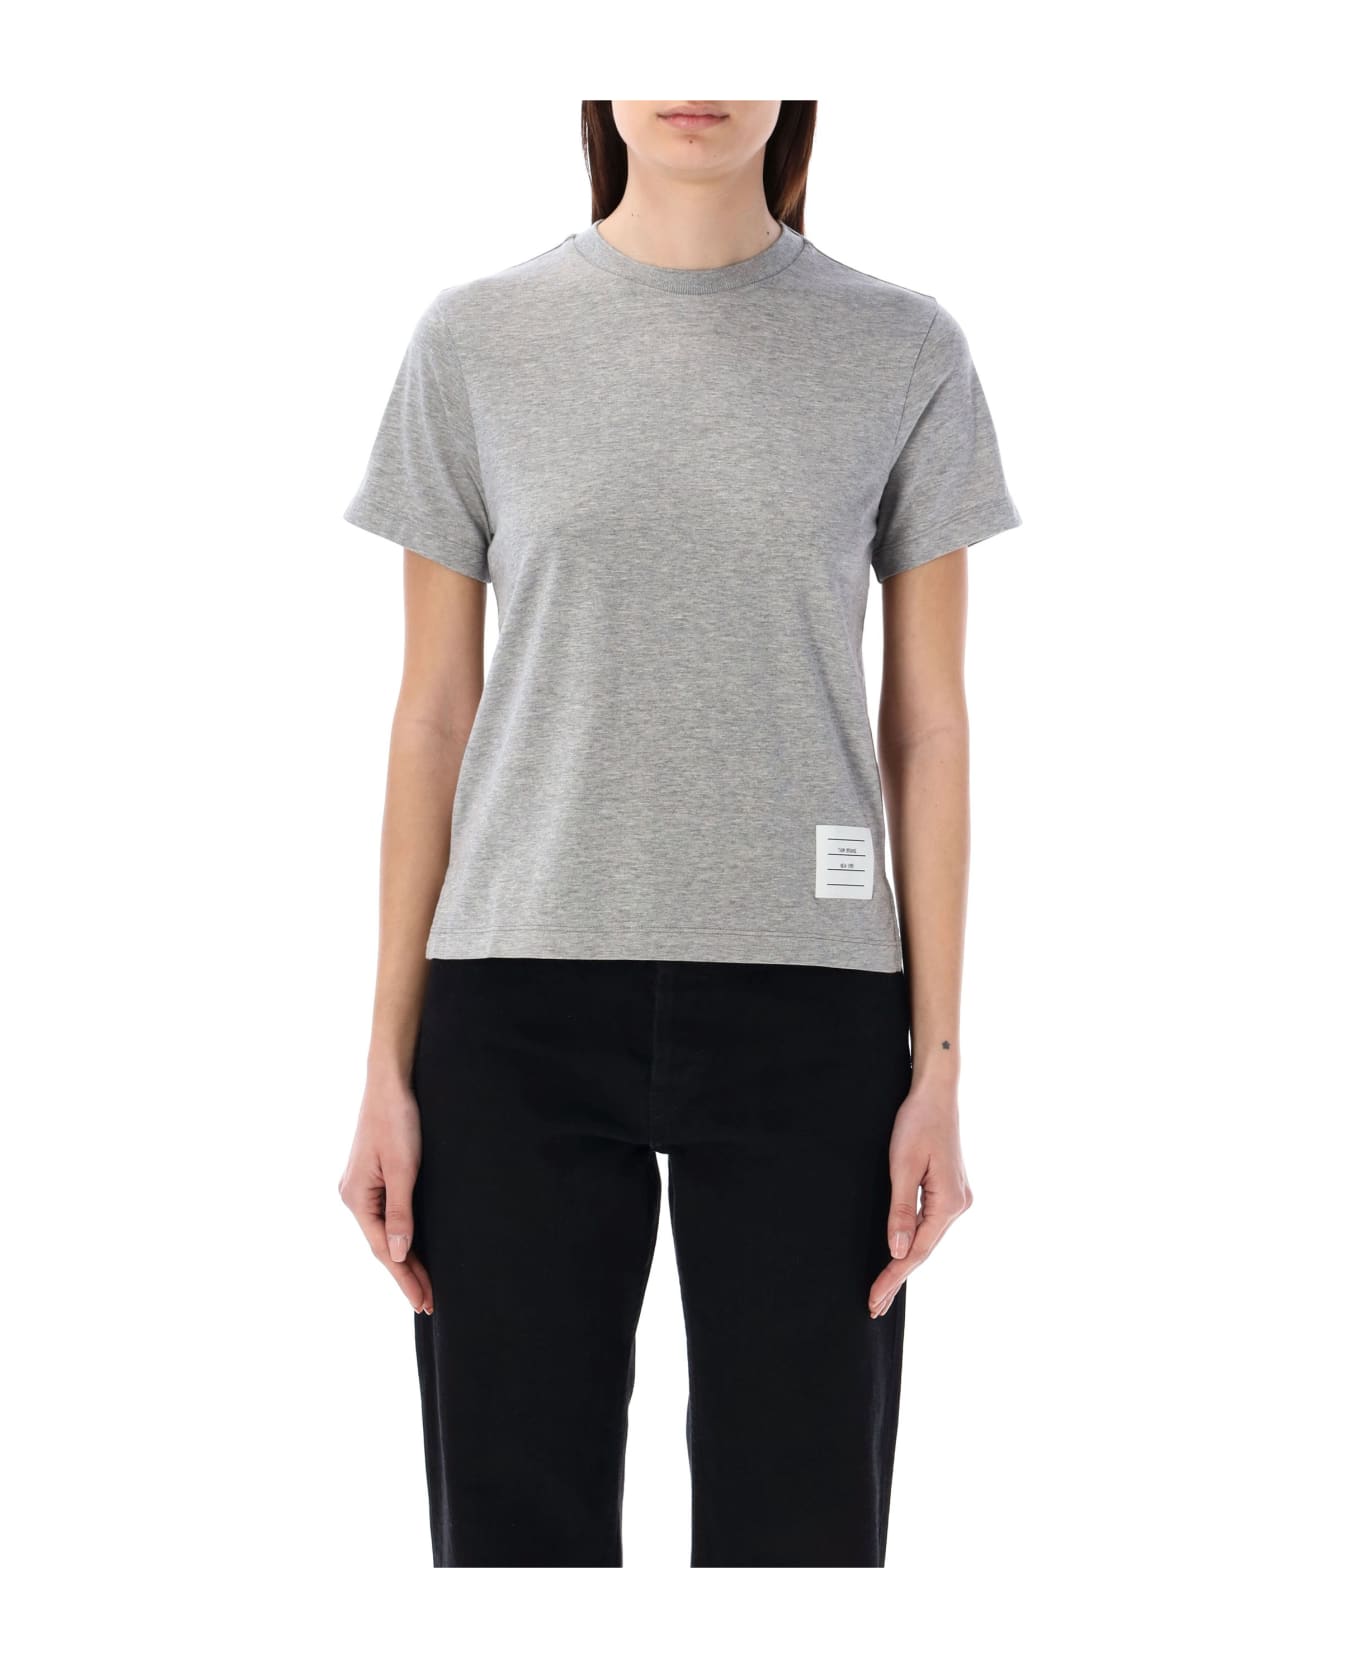 Thom Browne Relaxed Fit T-shirt - LIGHT GREY